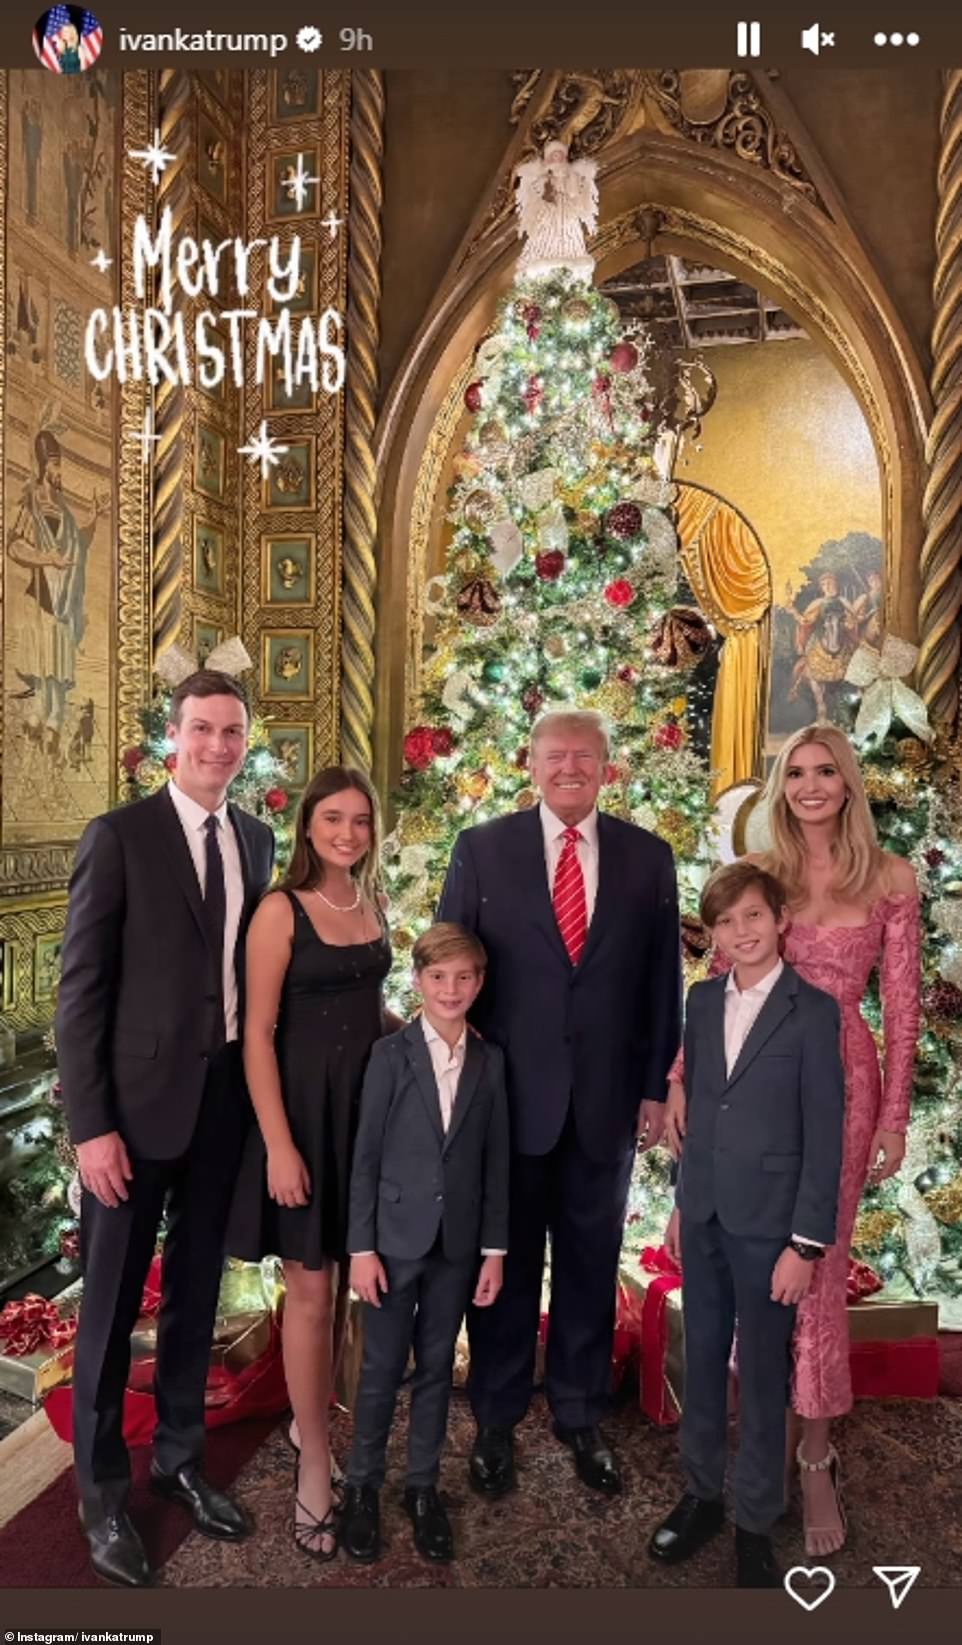 Ivanka also uploaded a photo of her family later in the evening, standing in front of an extravagant Christmas tree with her father the day after Christmas.  The family dressed up for the celebration, with the mum-of-three simply adding a Merry Christmas gif to her Instagram Story.